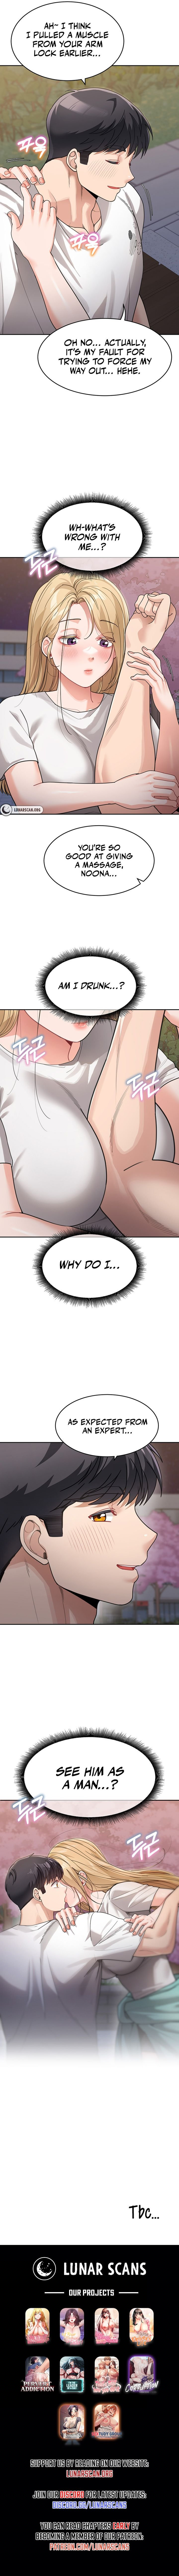 is-it-your-mother-or-sister-chap-31-8